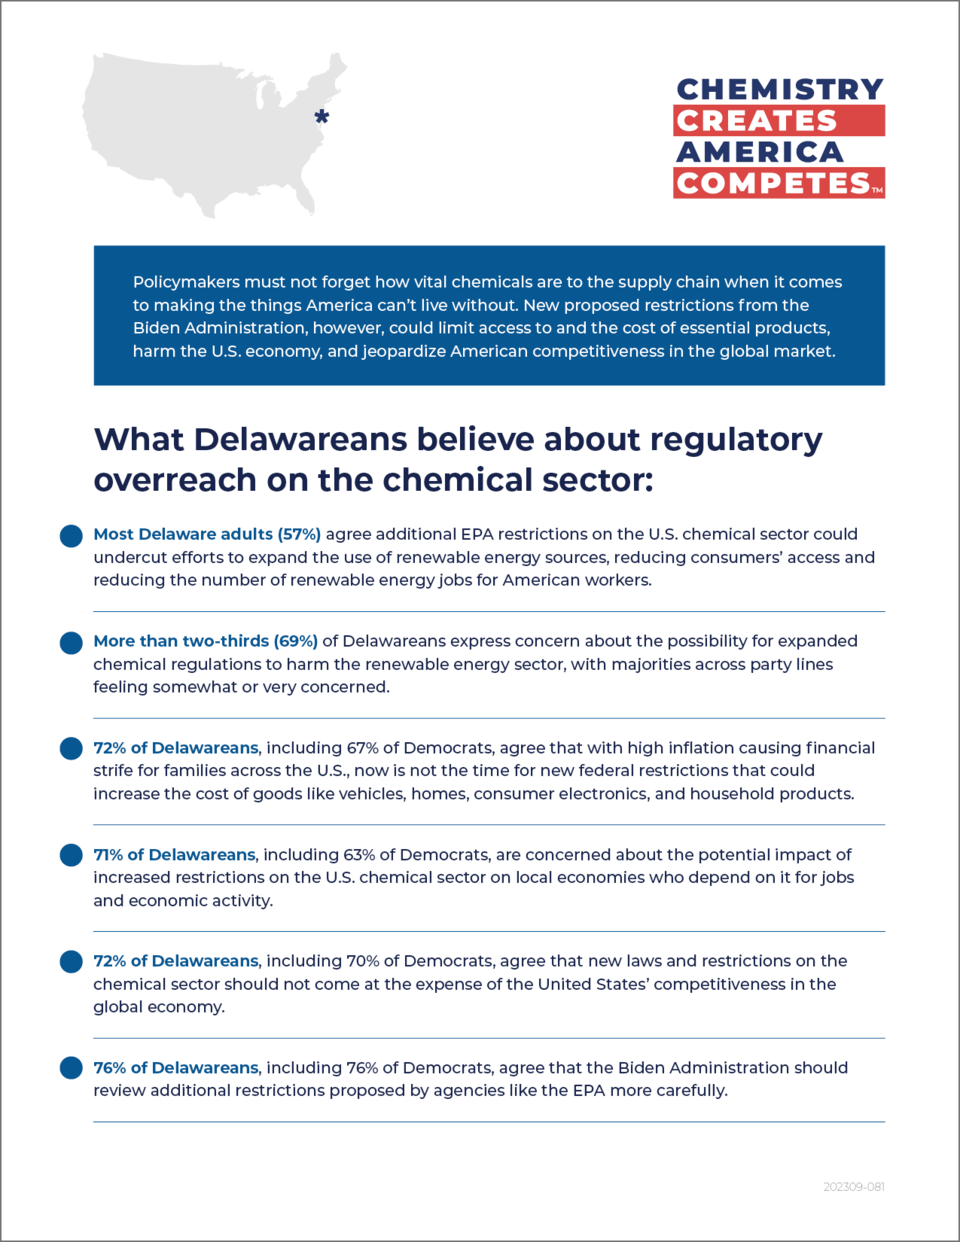 What Delawareans Believe About Regulatory Overreach on Chemical Sector - Fact Sheet